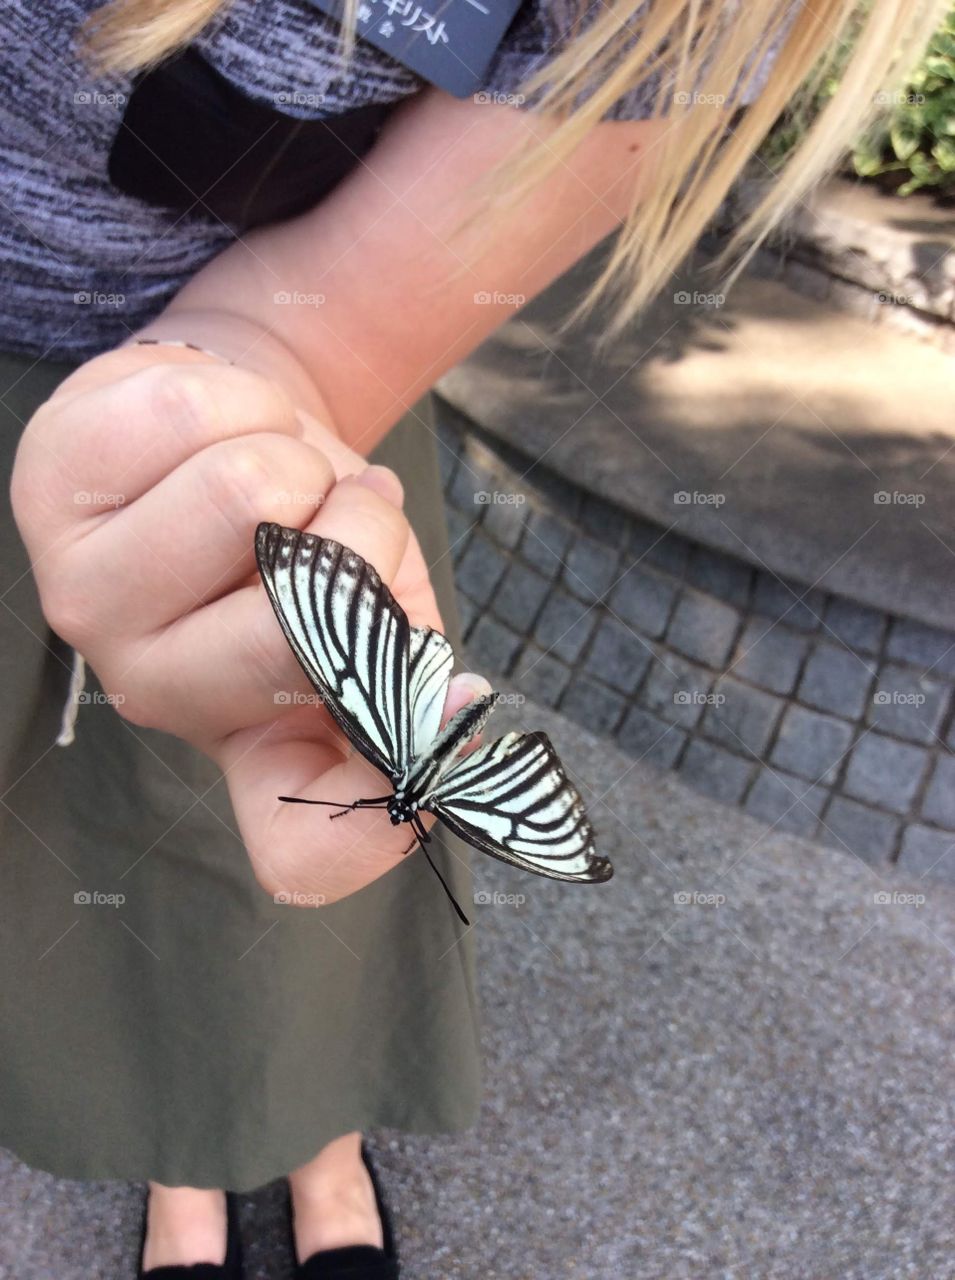 A little butterfly comes to say hello